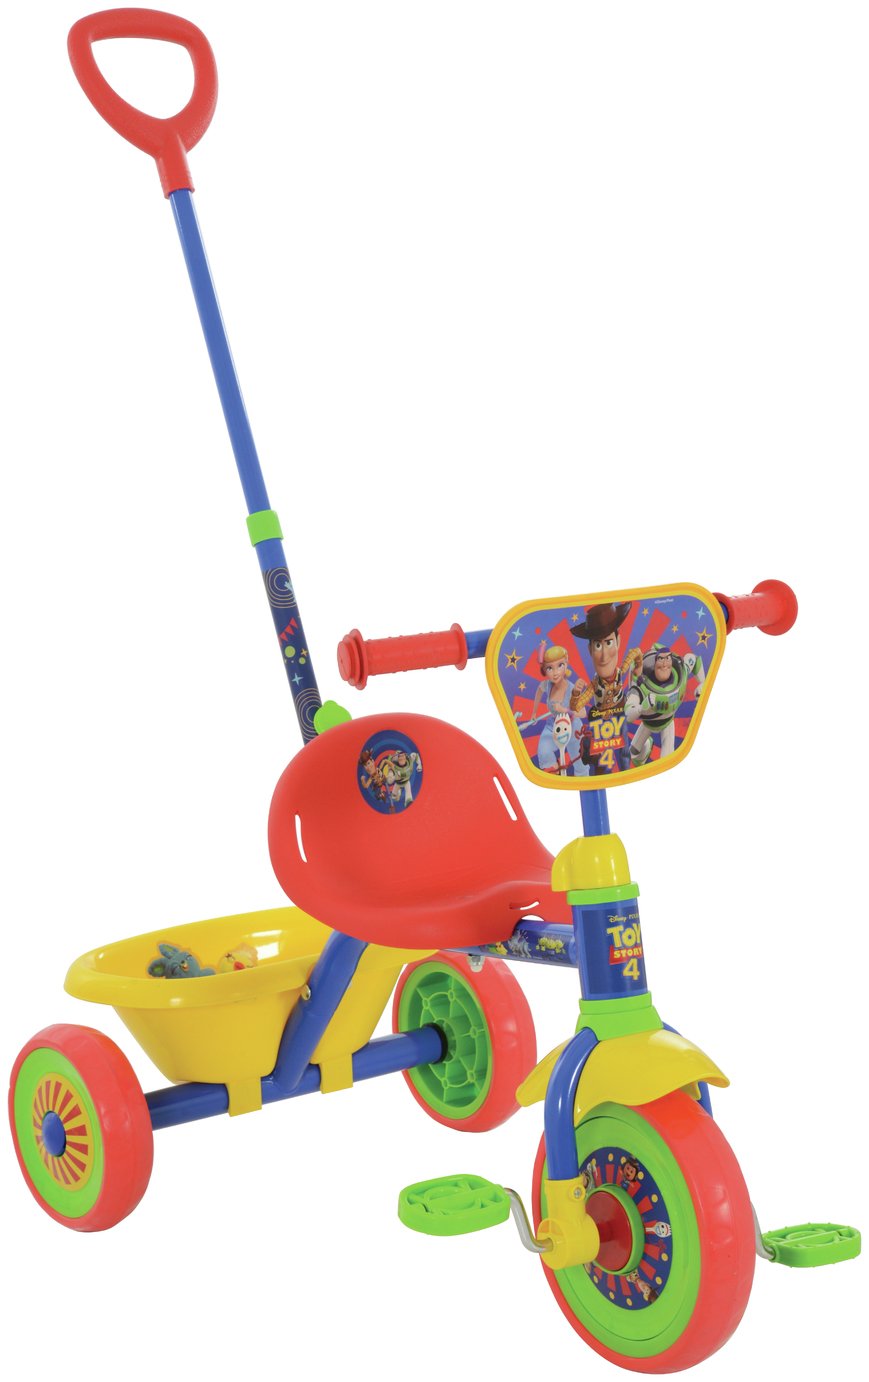 Disney Toy Story 4 My First Trike Review